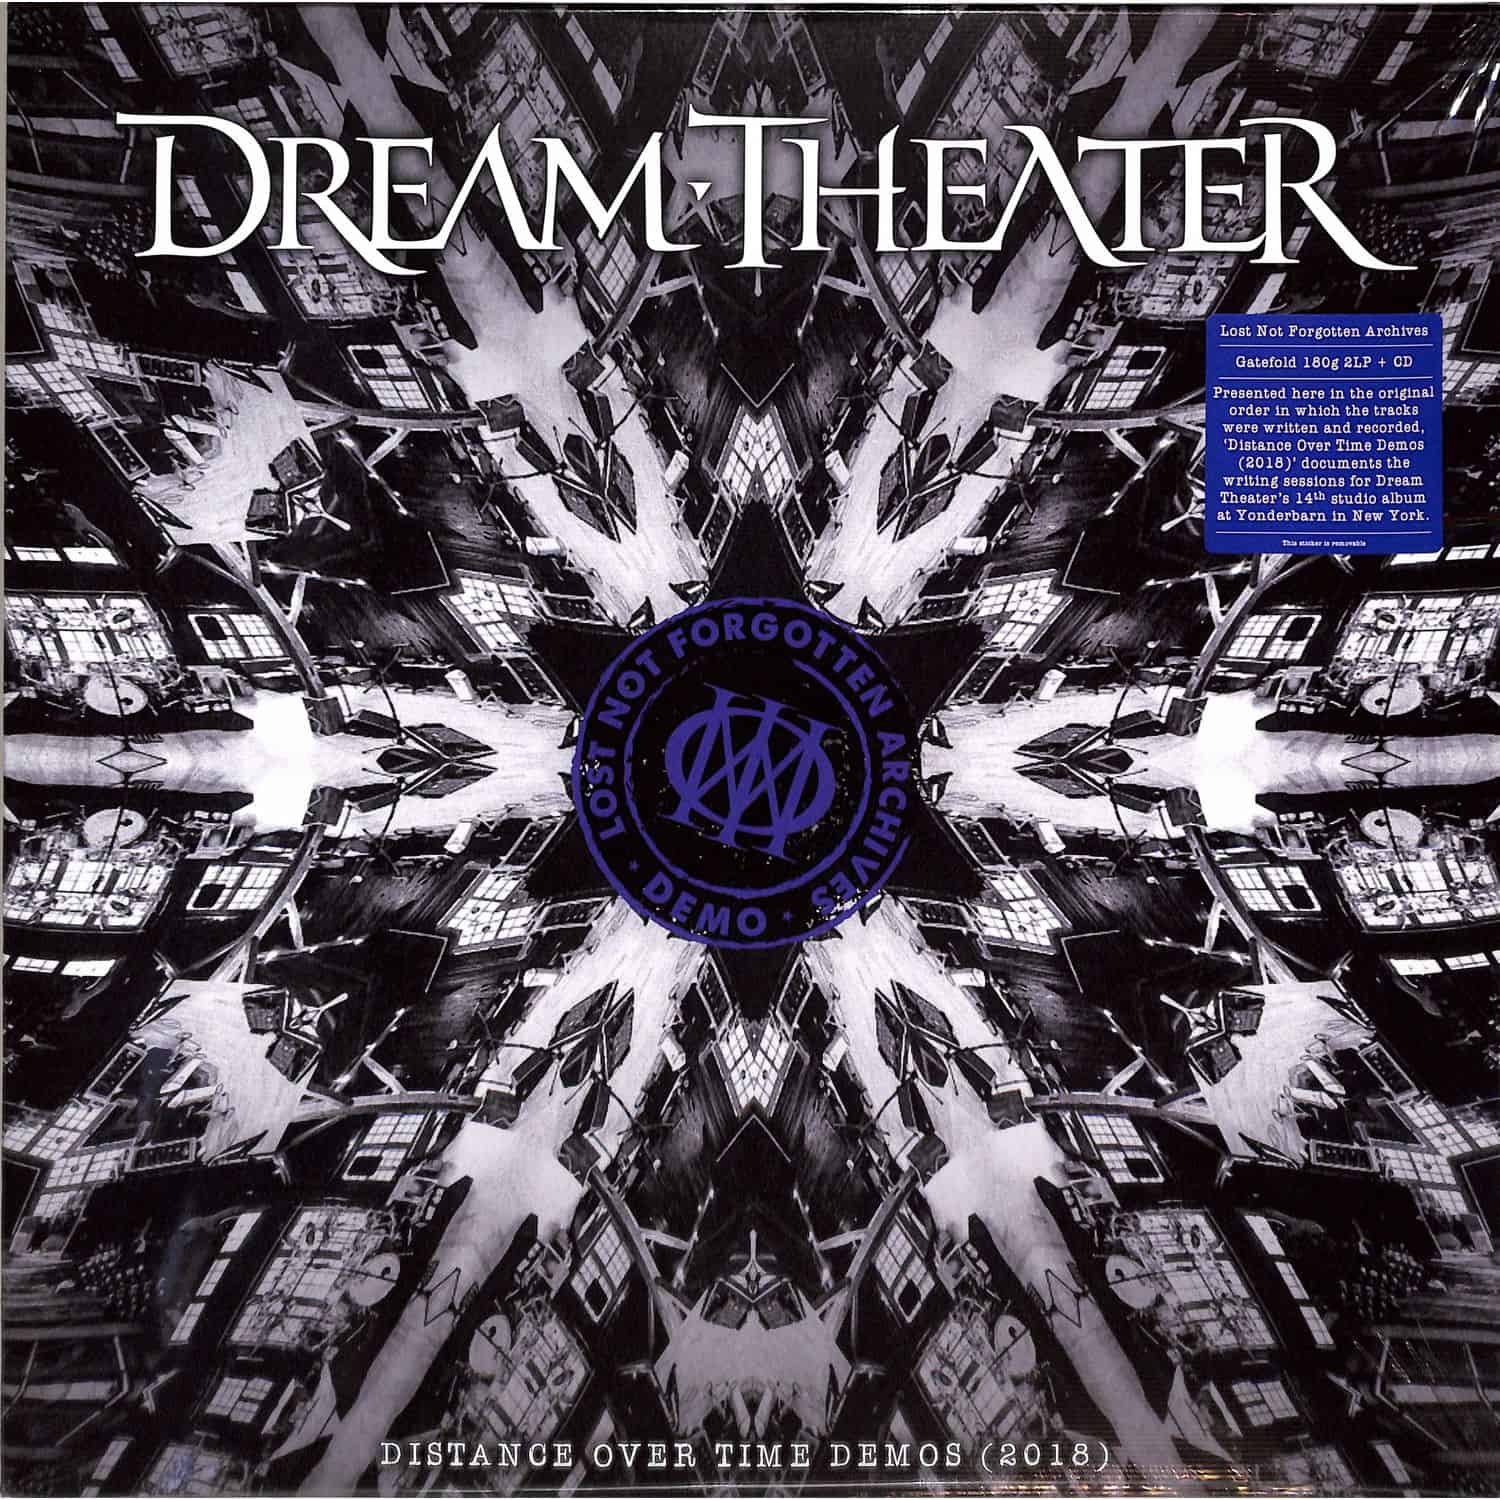 Dream Theater - LOST NOT FORGOTTEN ARCHIVES: DISTANCE OVER TIME DE 